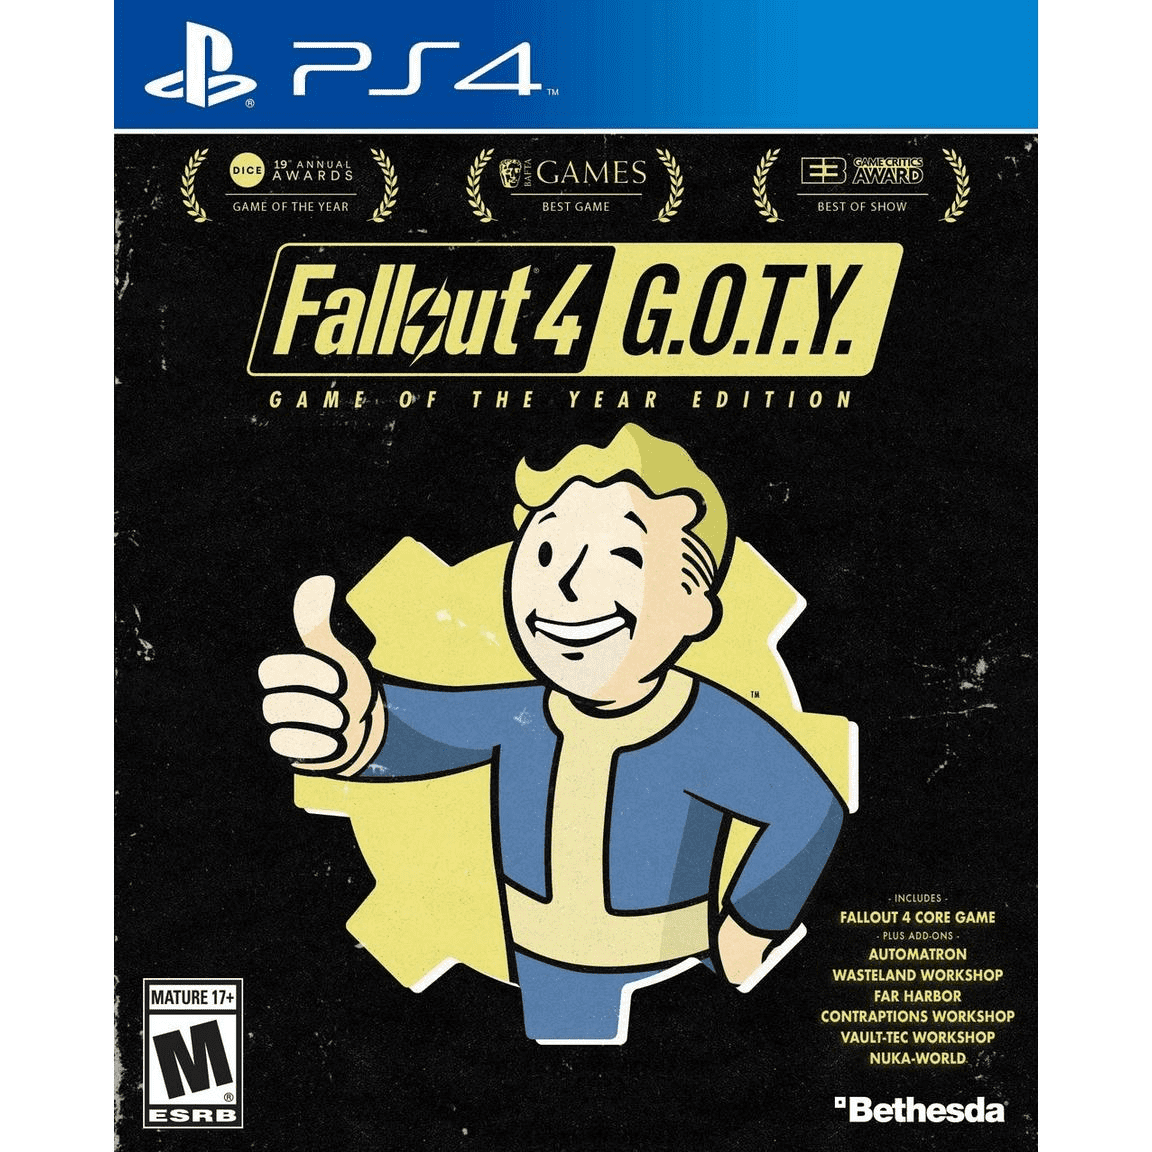 Bethesda Fallout 4 (PS4) the Game of Steelbook Year